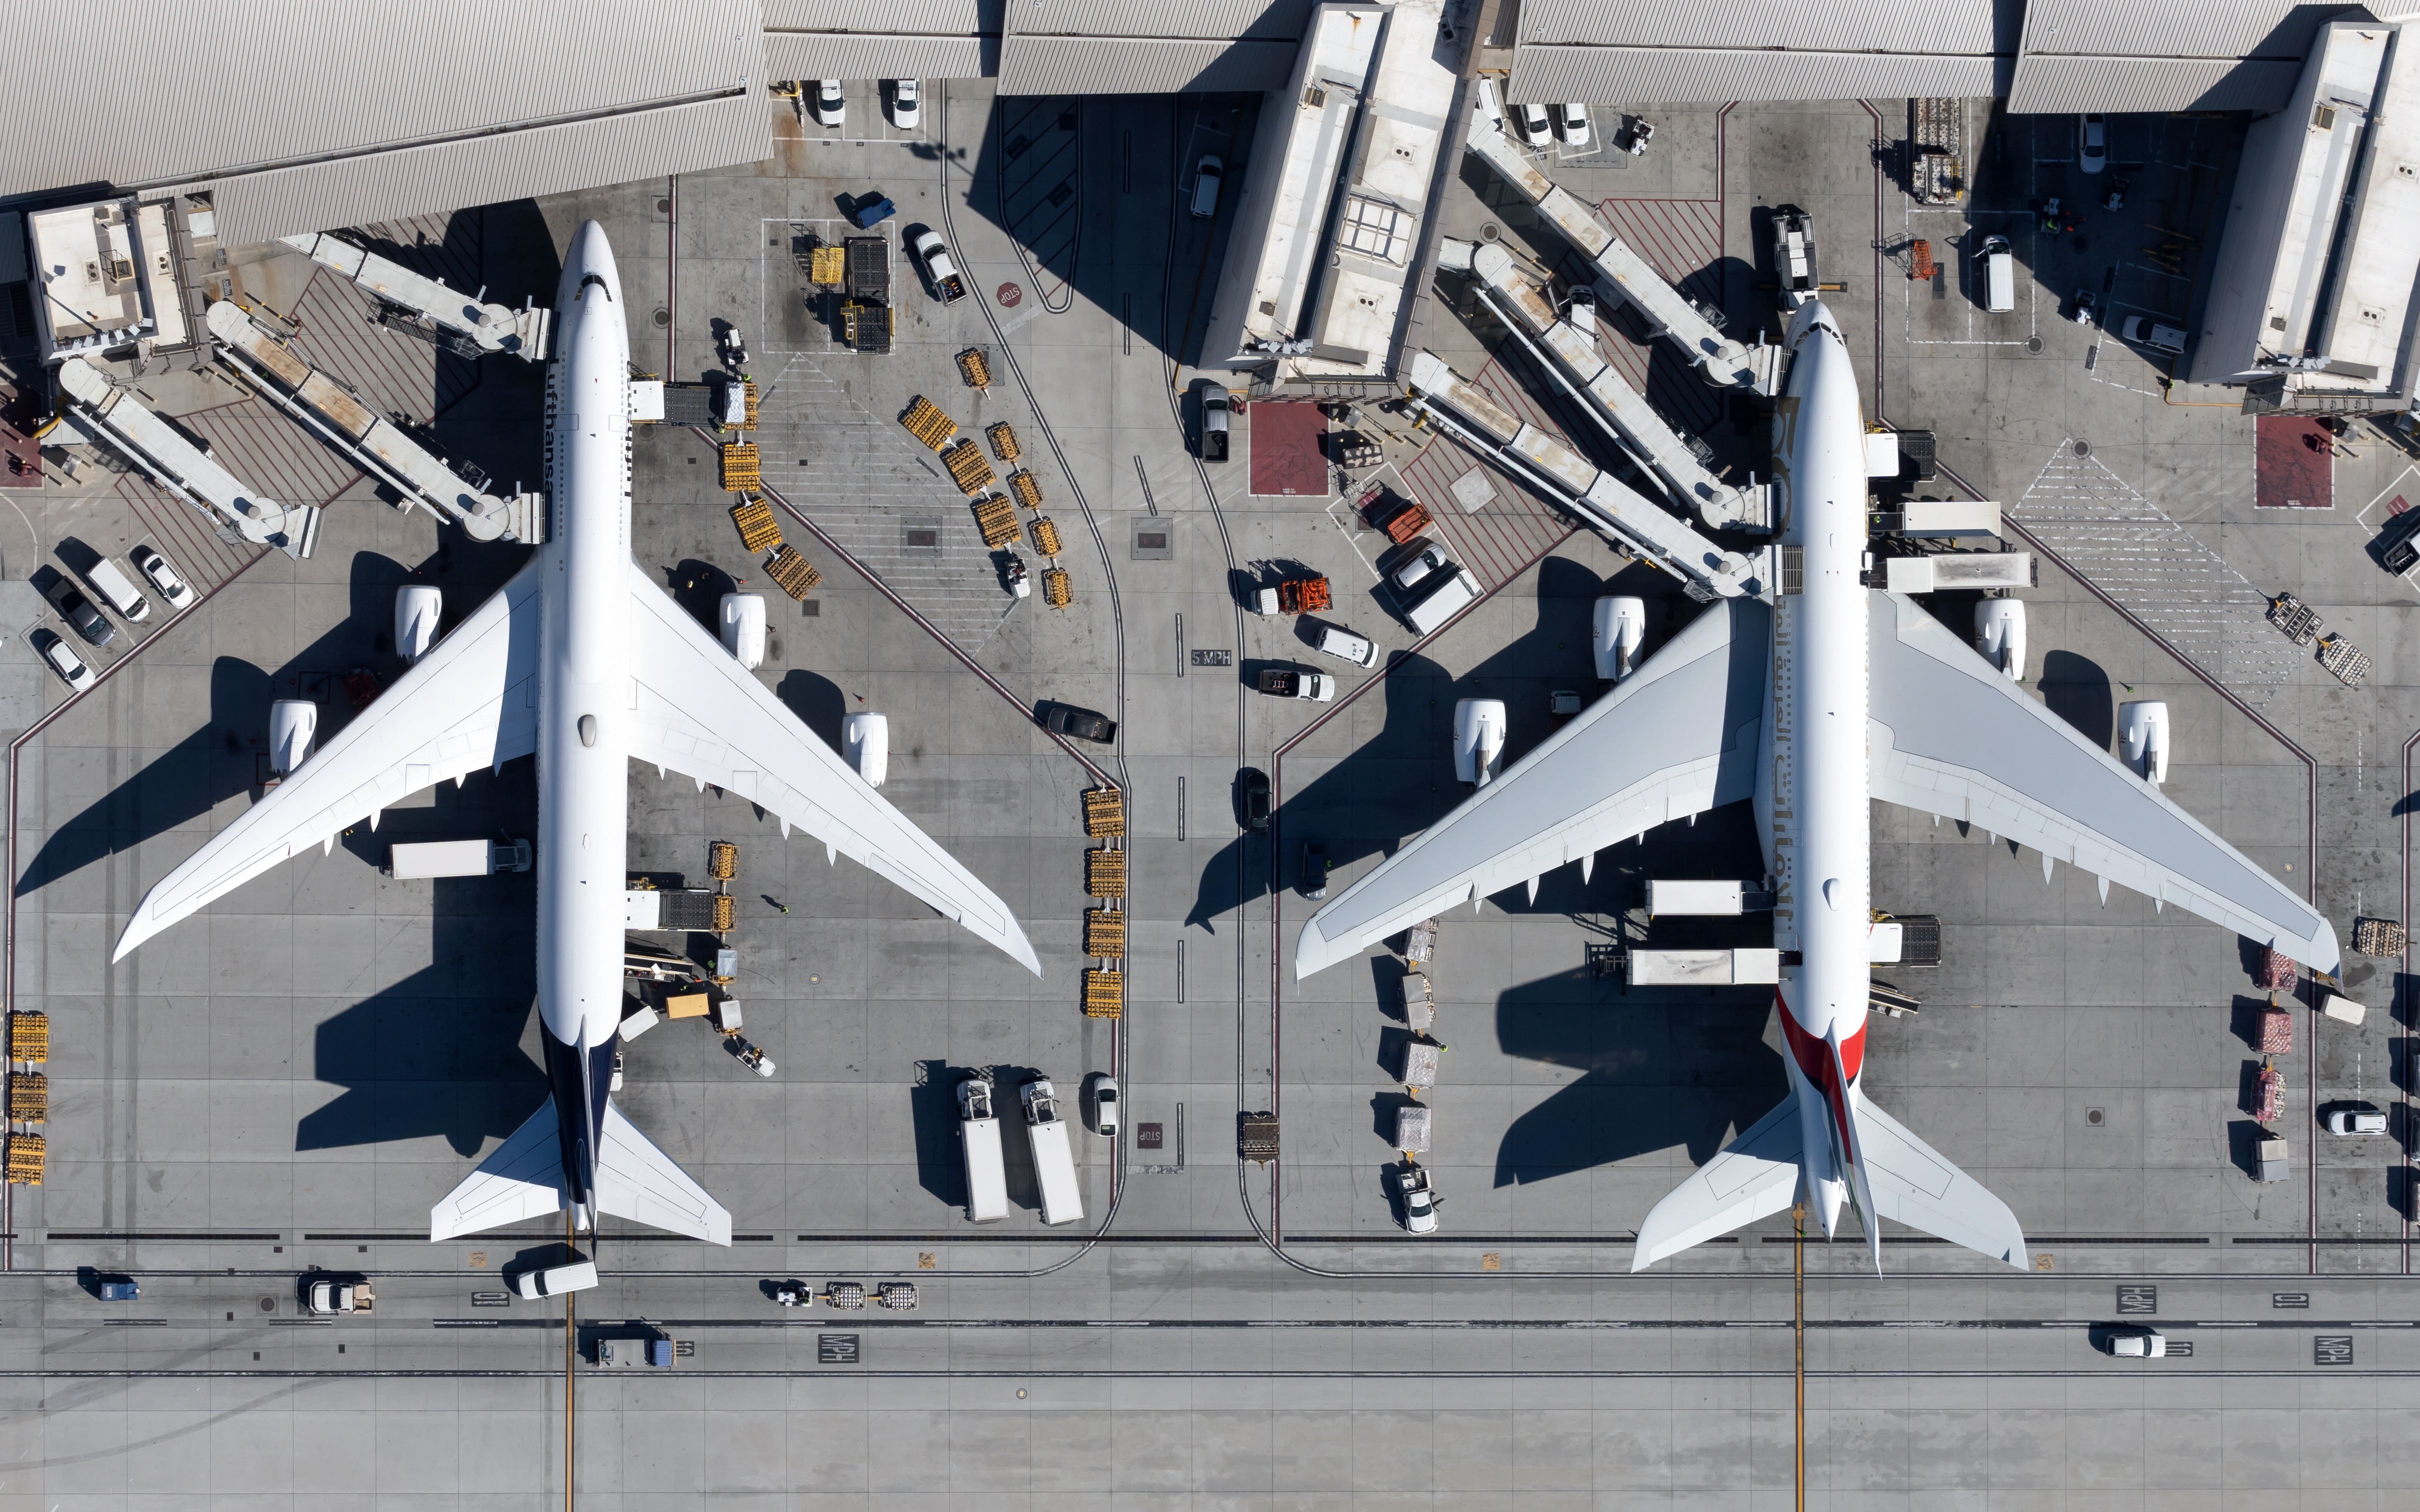 Long-haul twin jets at LAX